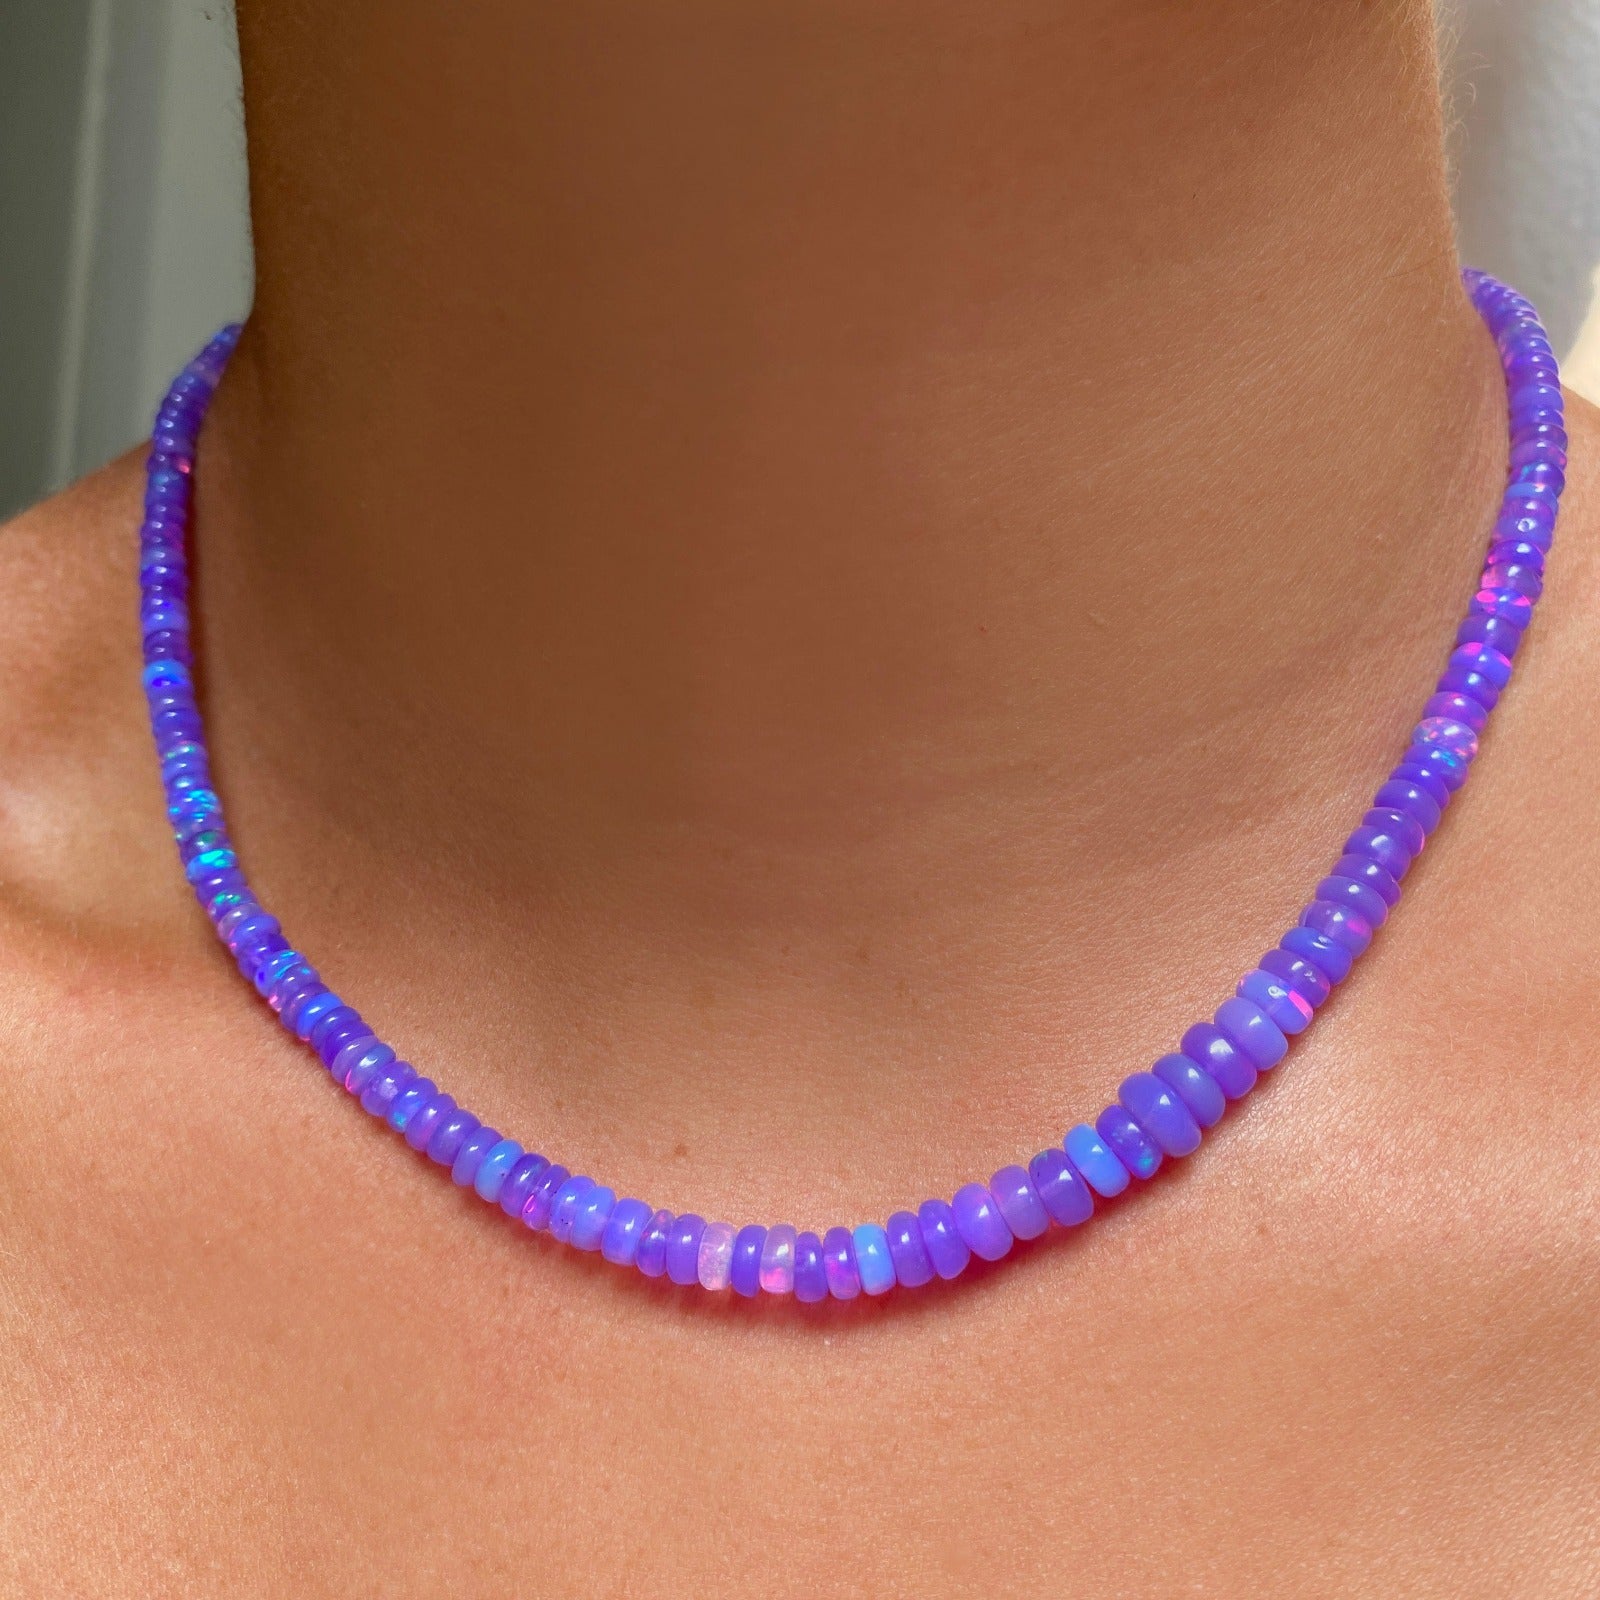 Shimmering beaded necklace made of smooth opal rondels in shades of violet on a slim gold oval clasp.